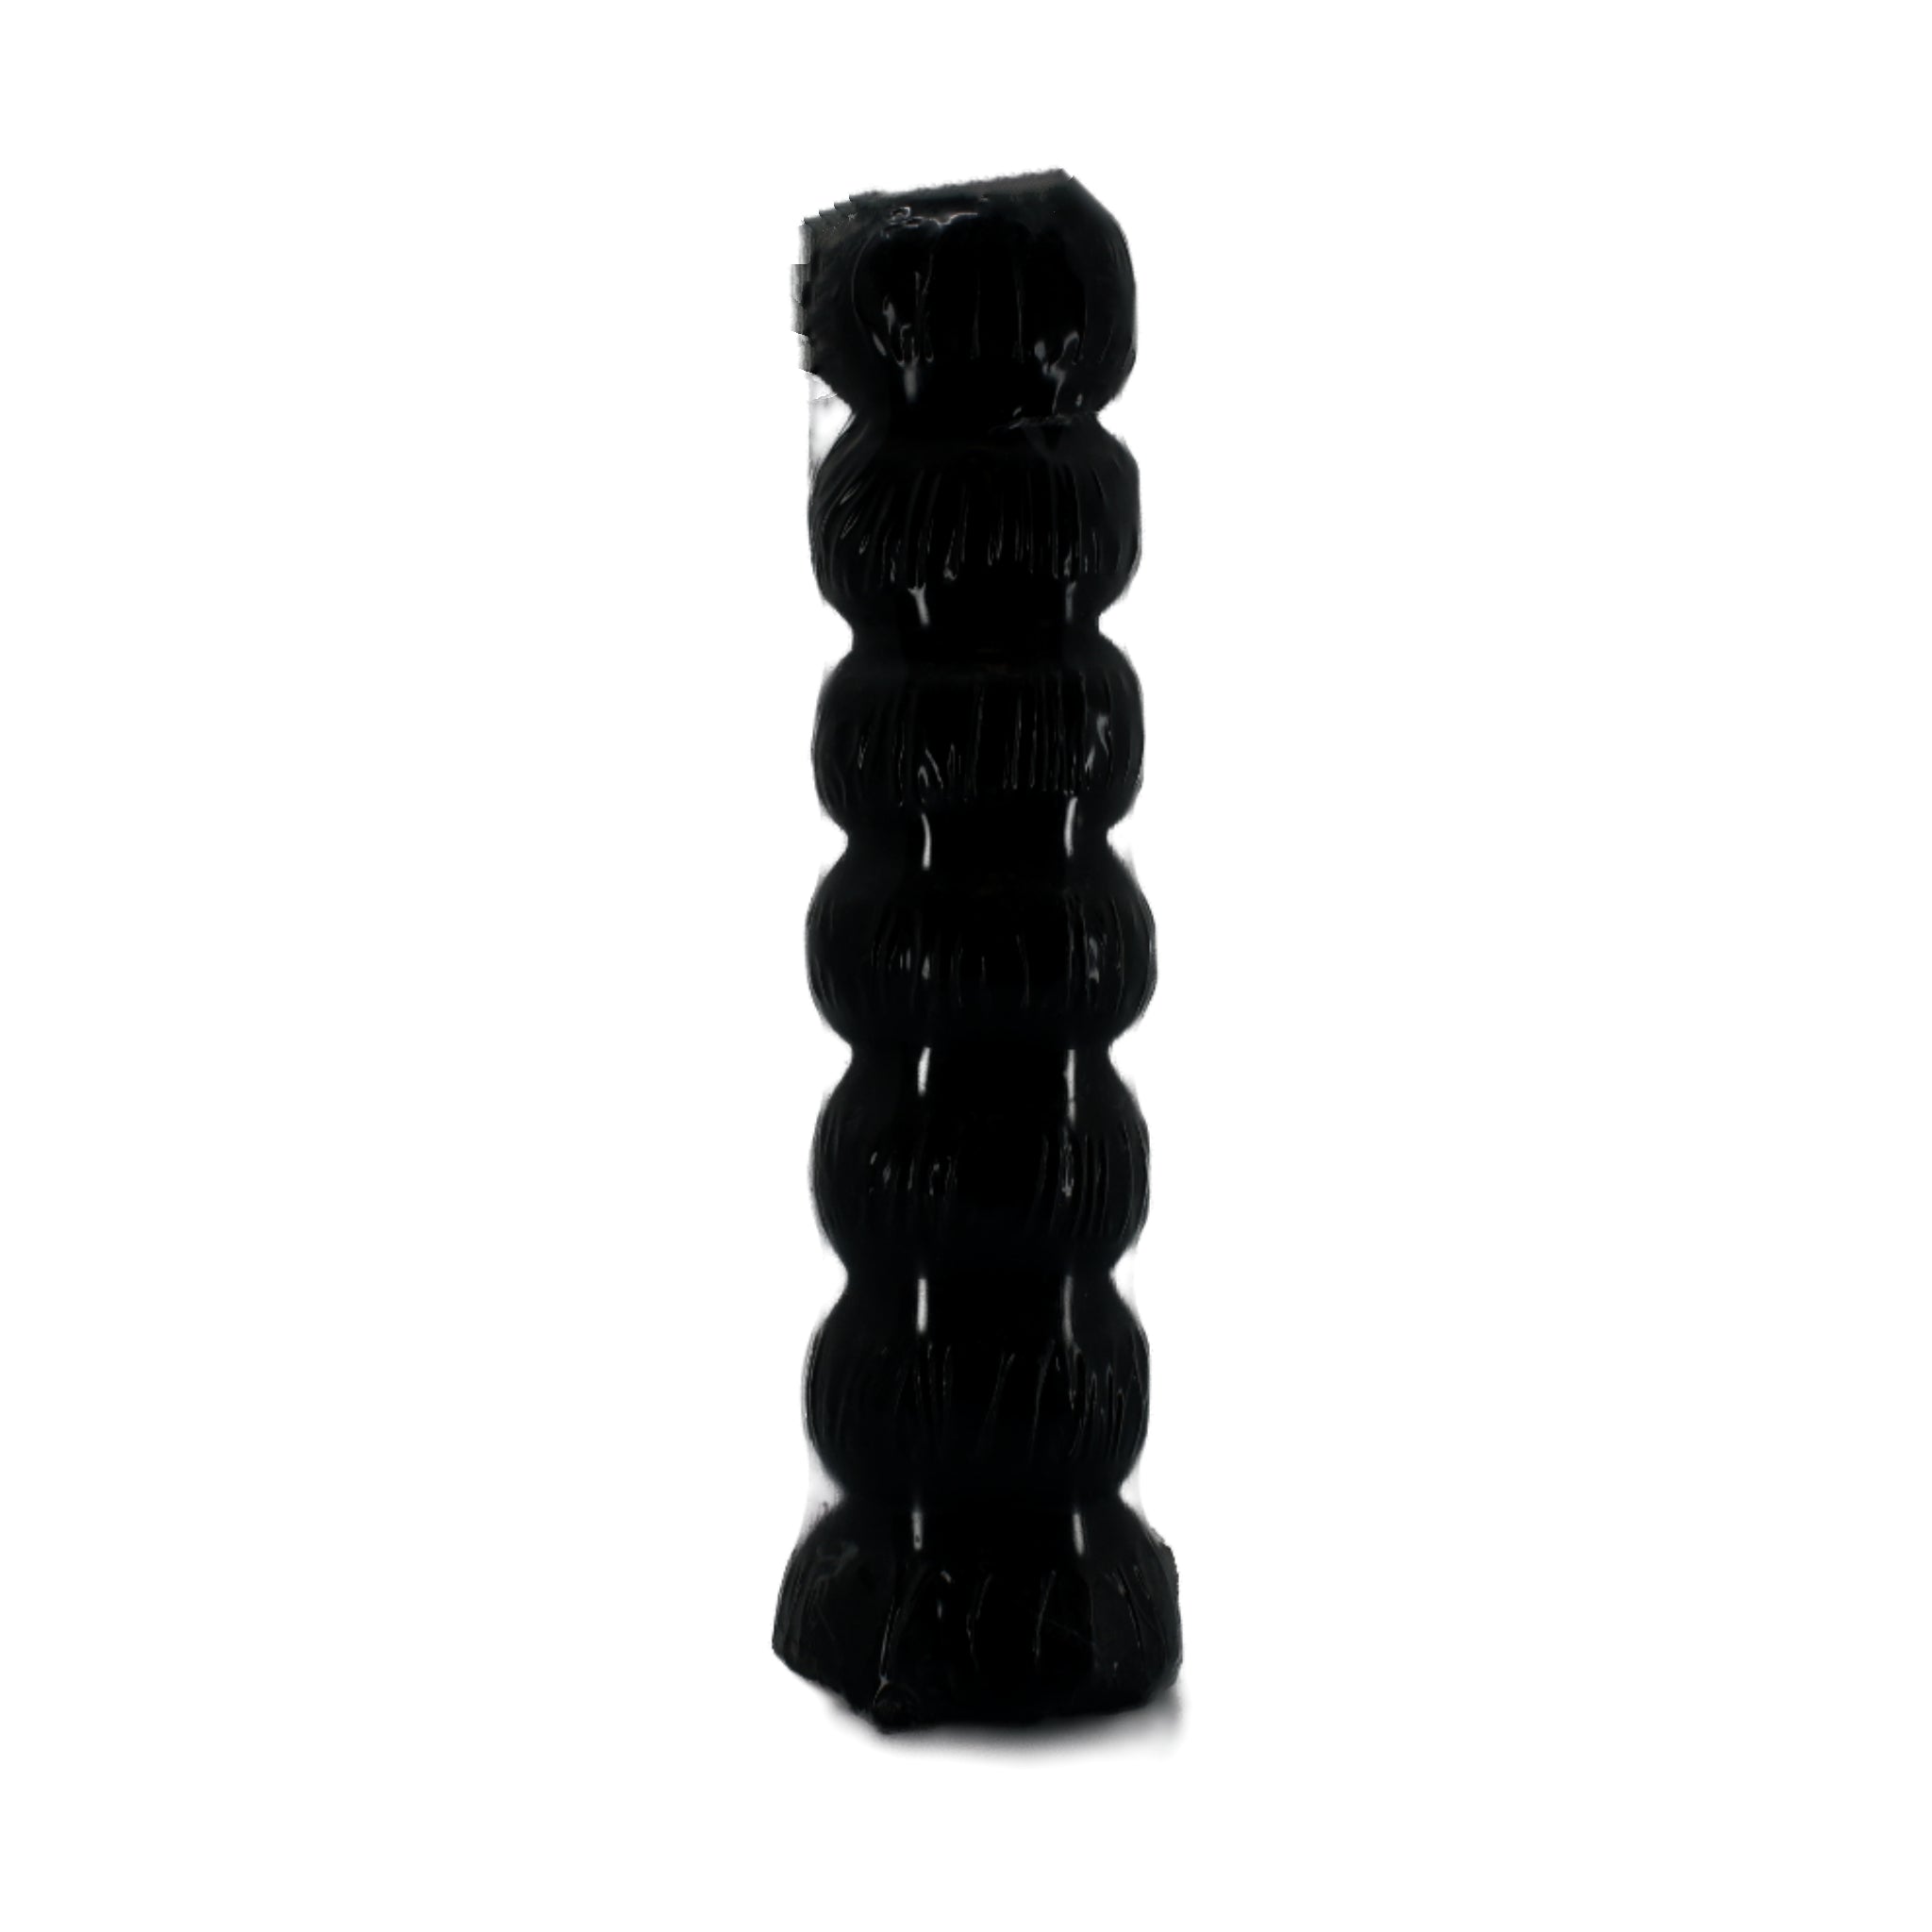 Black 7 Day Knob Candle use for protection.